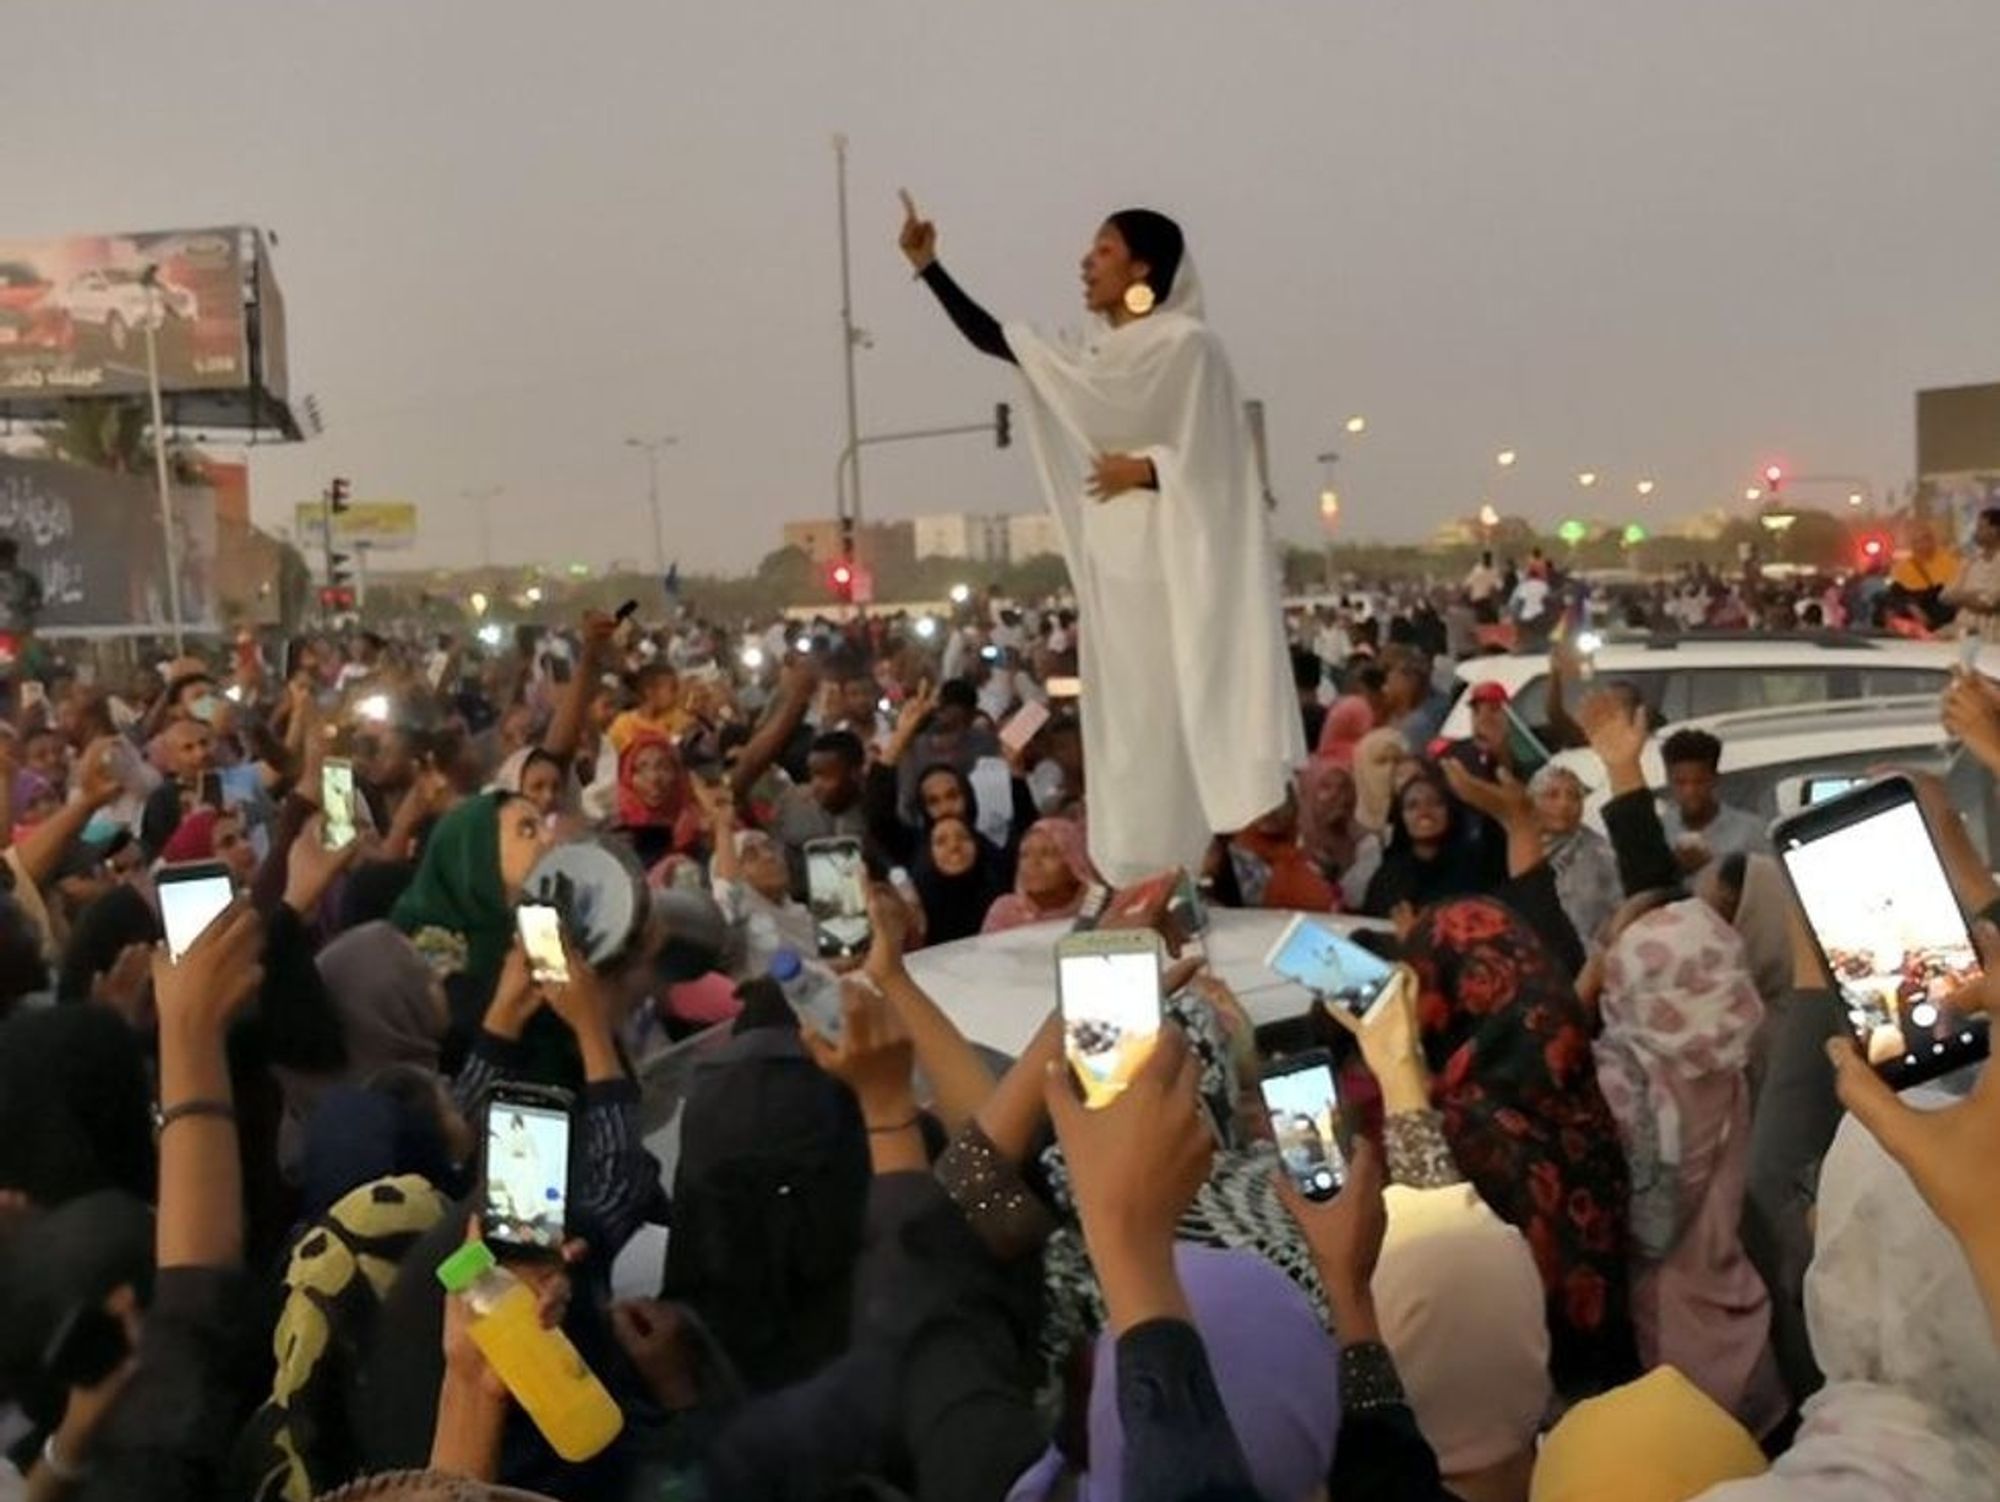 From #FeesMustFall to #BlueforSudan: OkayAfrica's Guide to a Decade of African Hashtag Activism